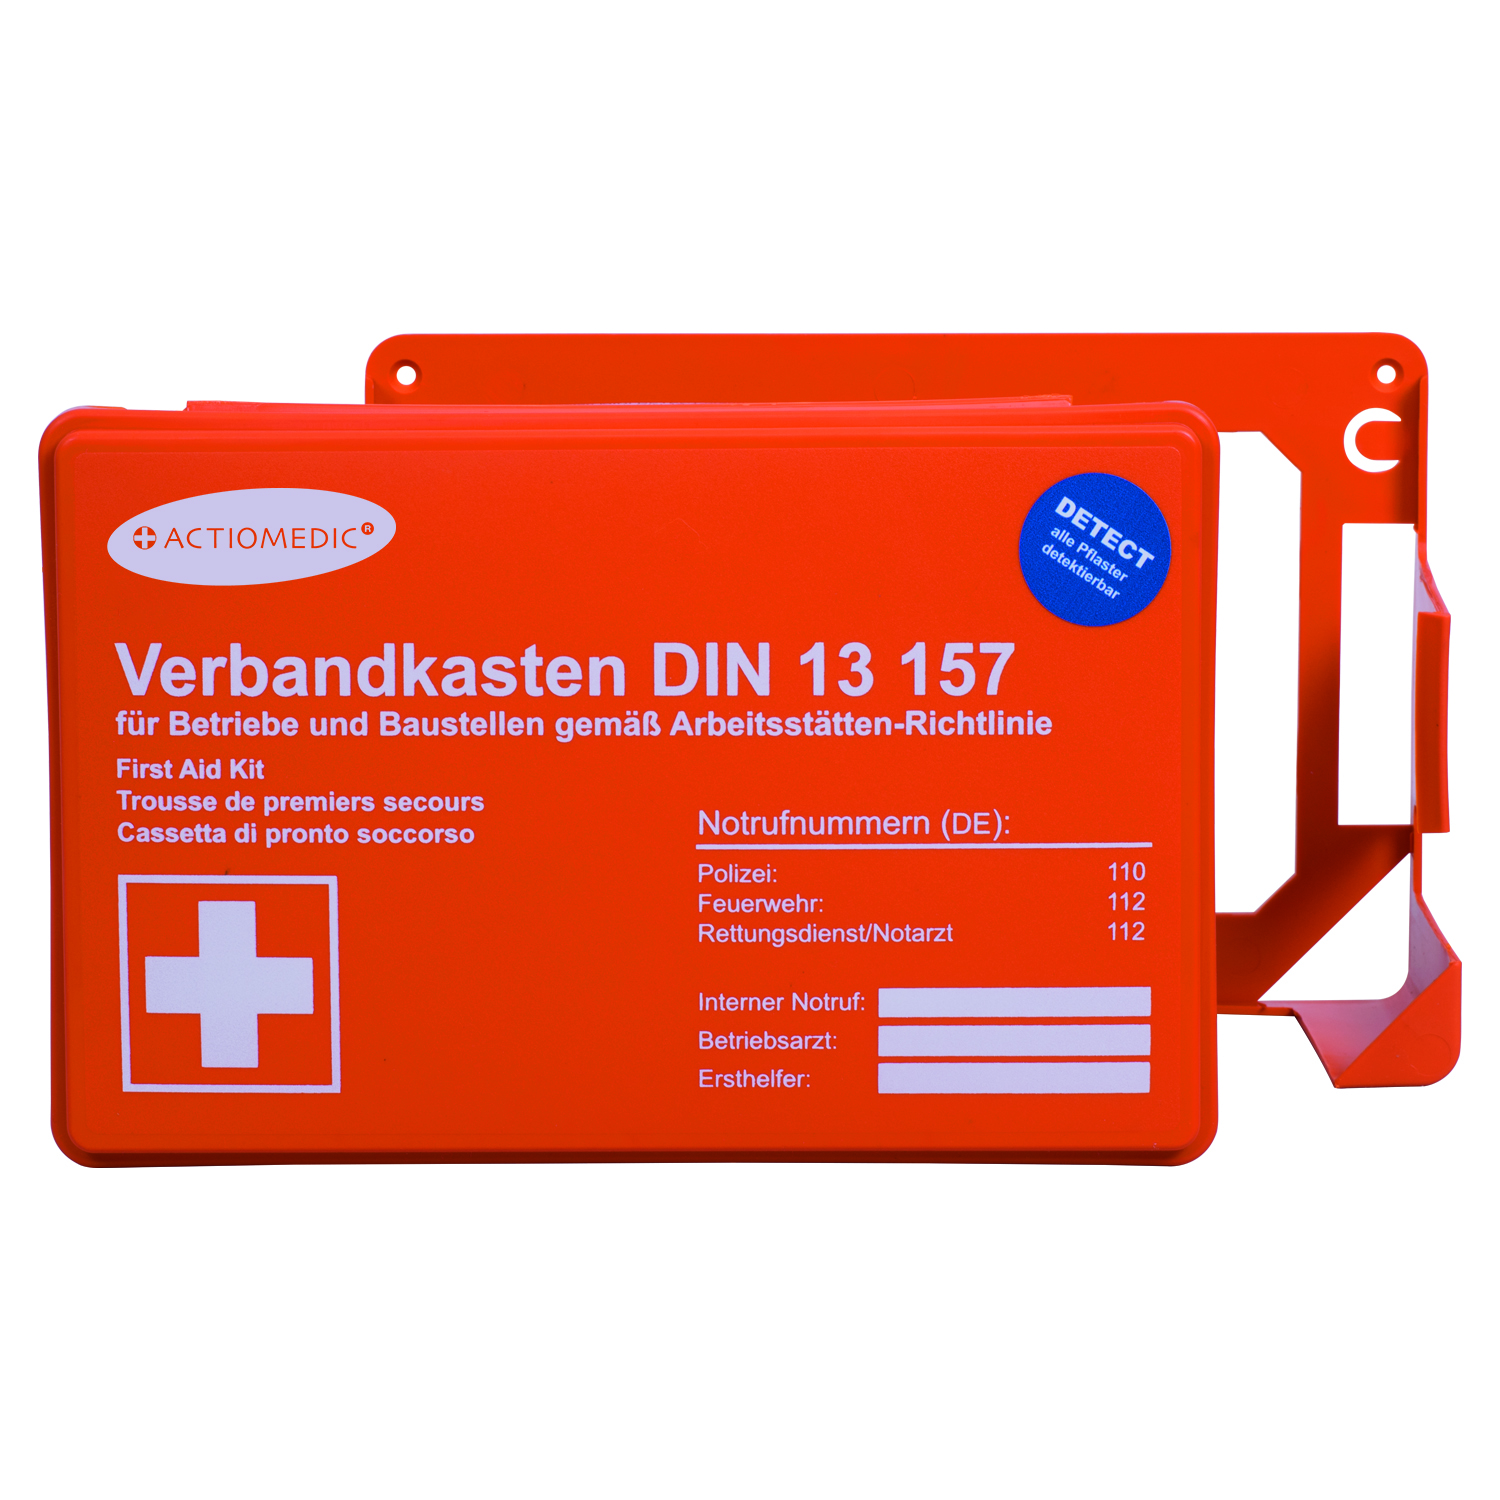 First aid kit according to DIN 13157 in orange